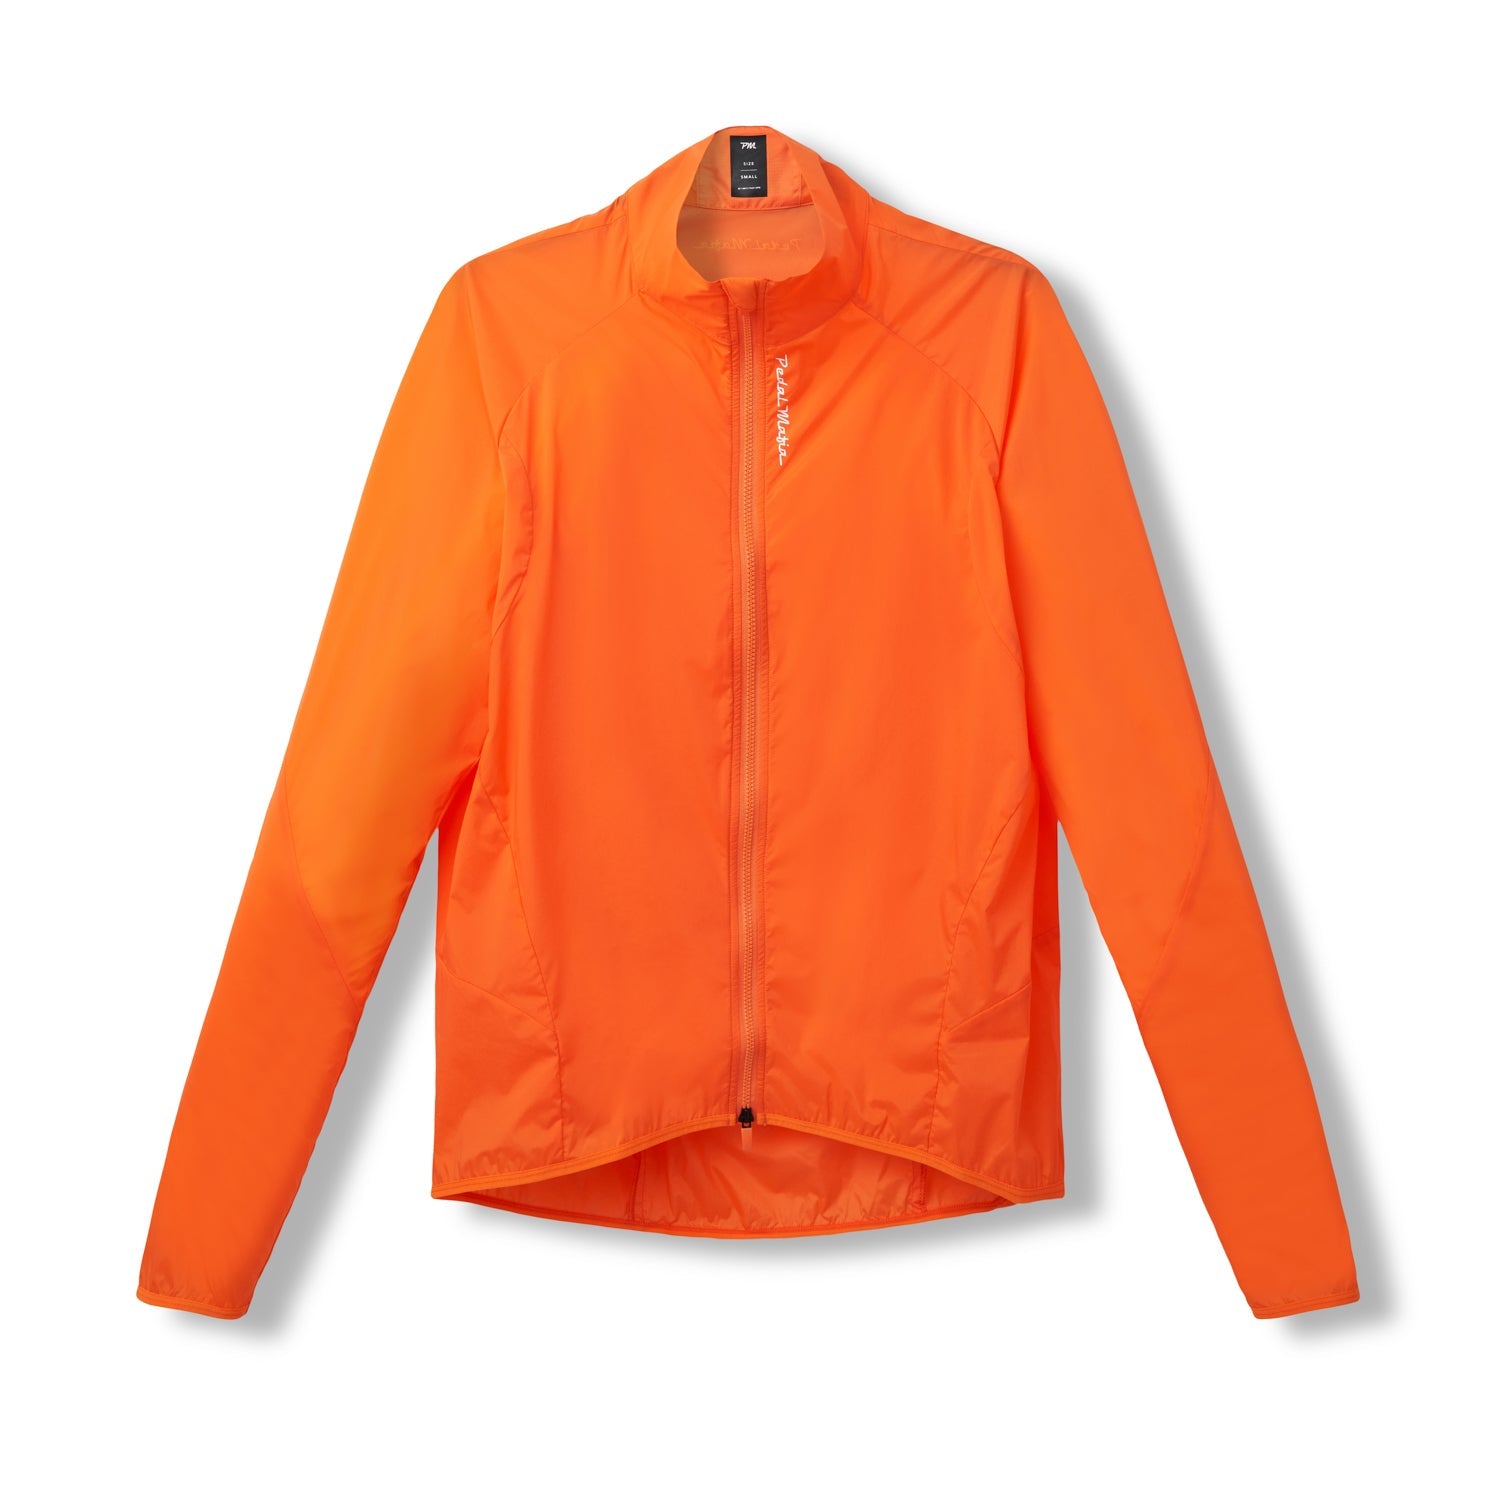 Full Sleeve Casual Wear Mens Orange Puffer Jacket at best price in Hisar